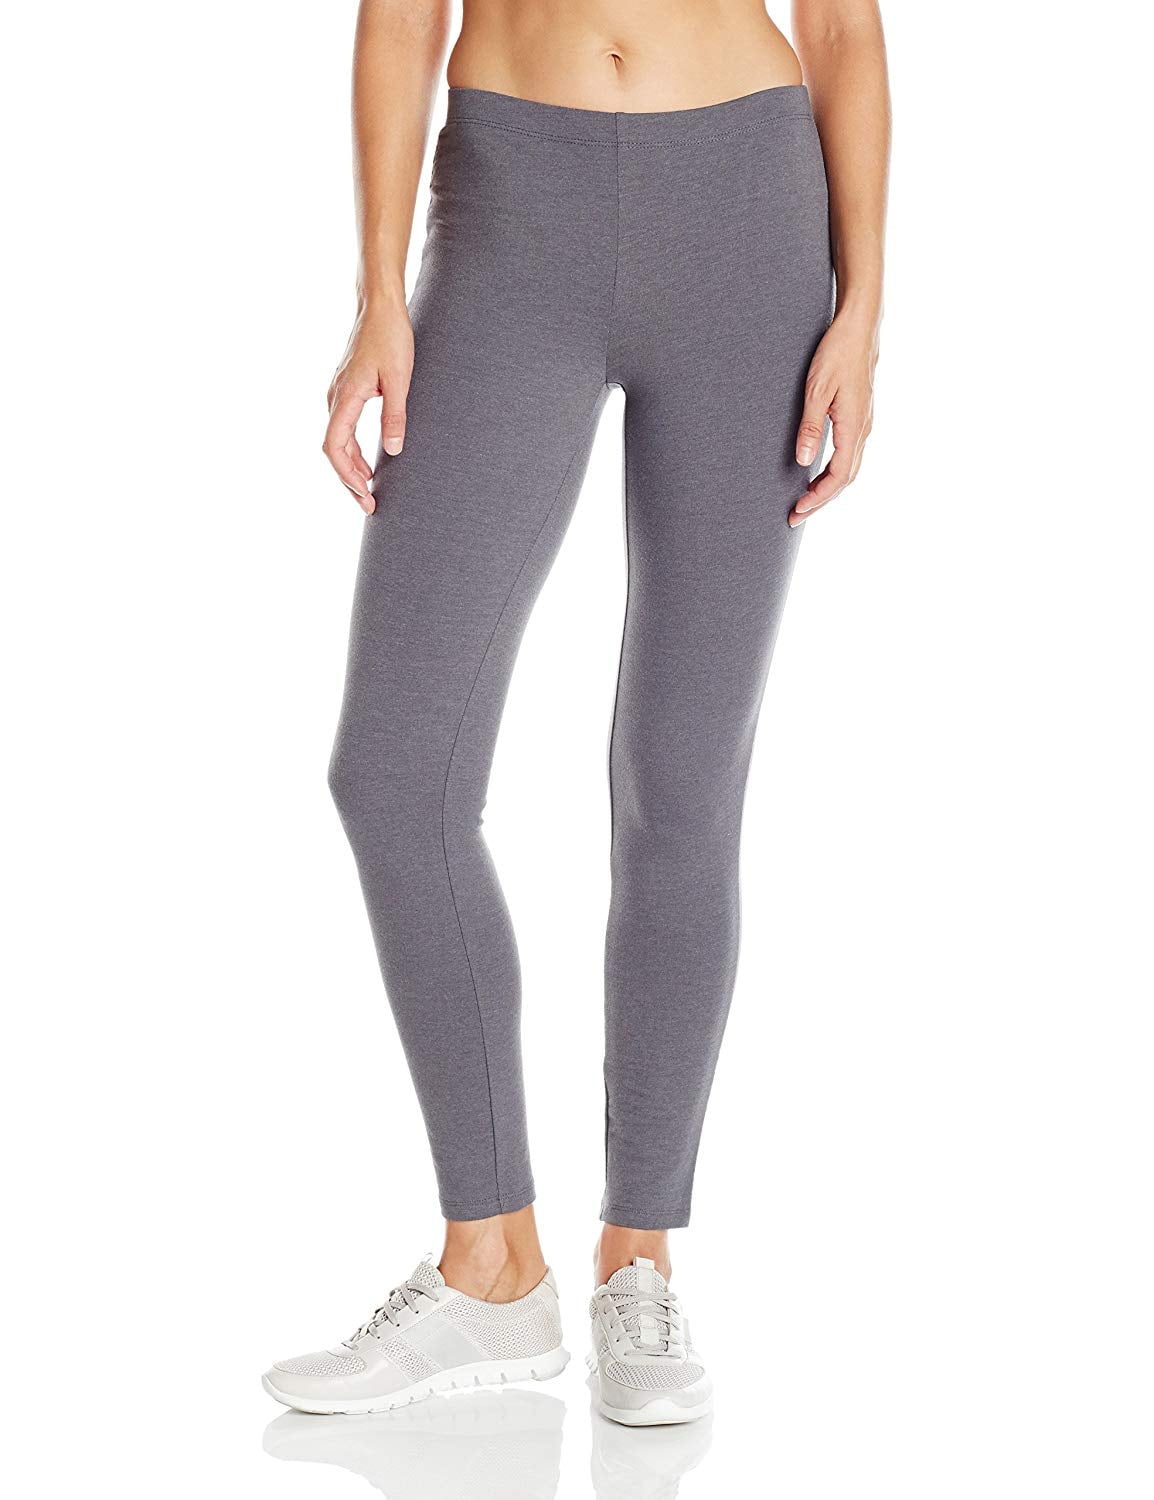 Hanes Stretch Jersey Leggings, Meet 's $14 Bestselling Leggings —  and 12 More Cosy, Comfy Options You'll Love